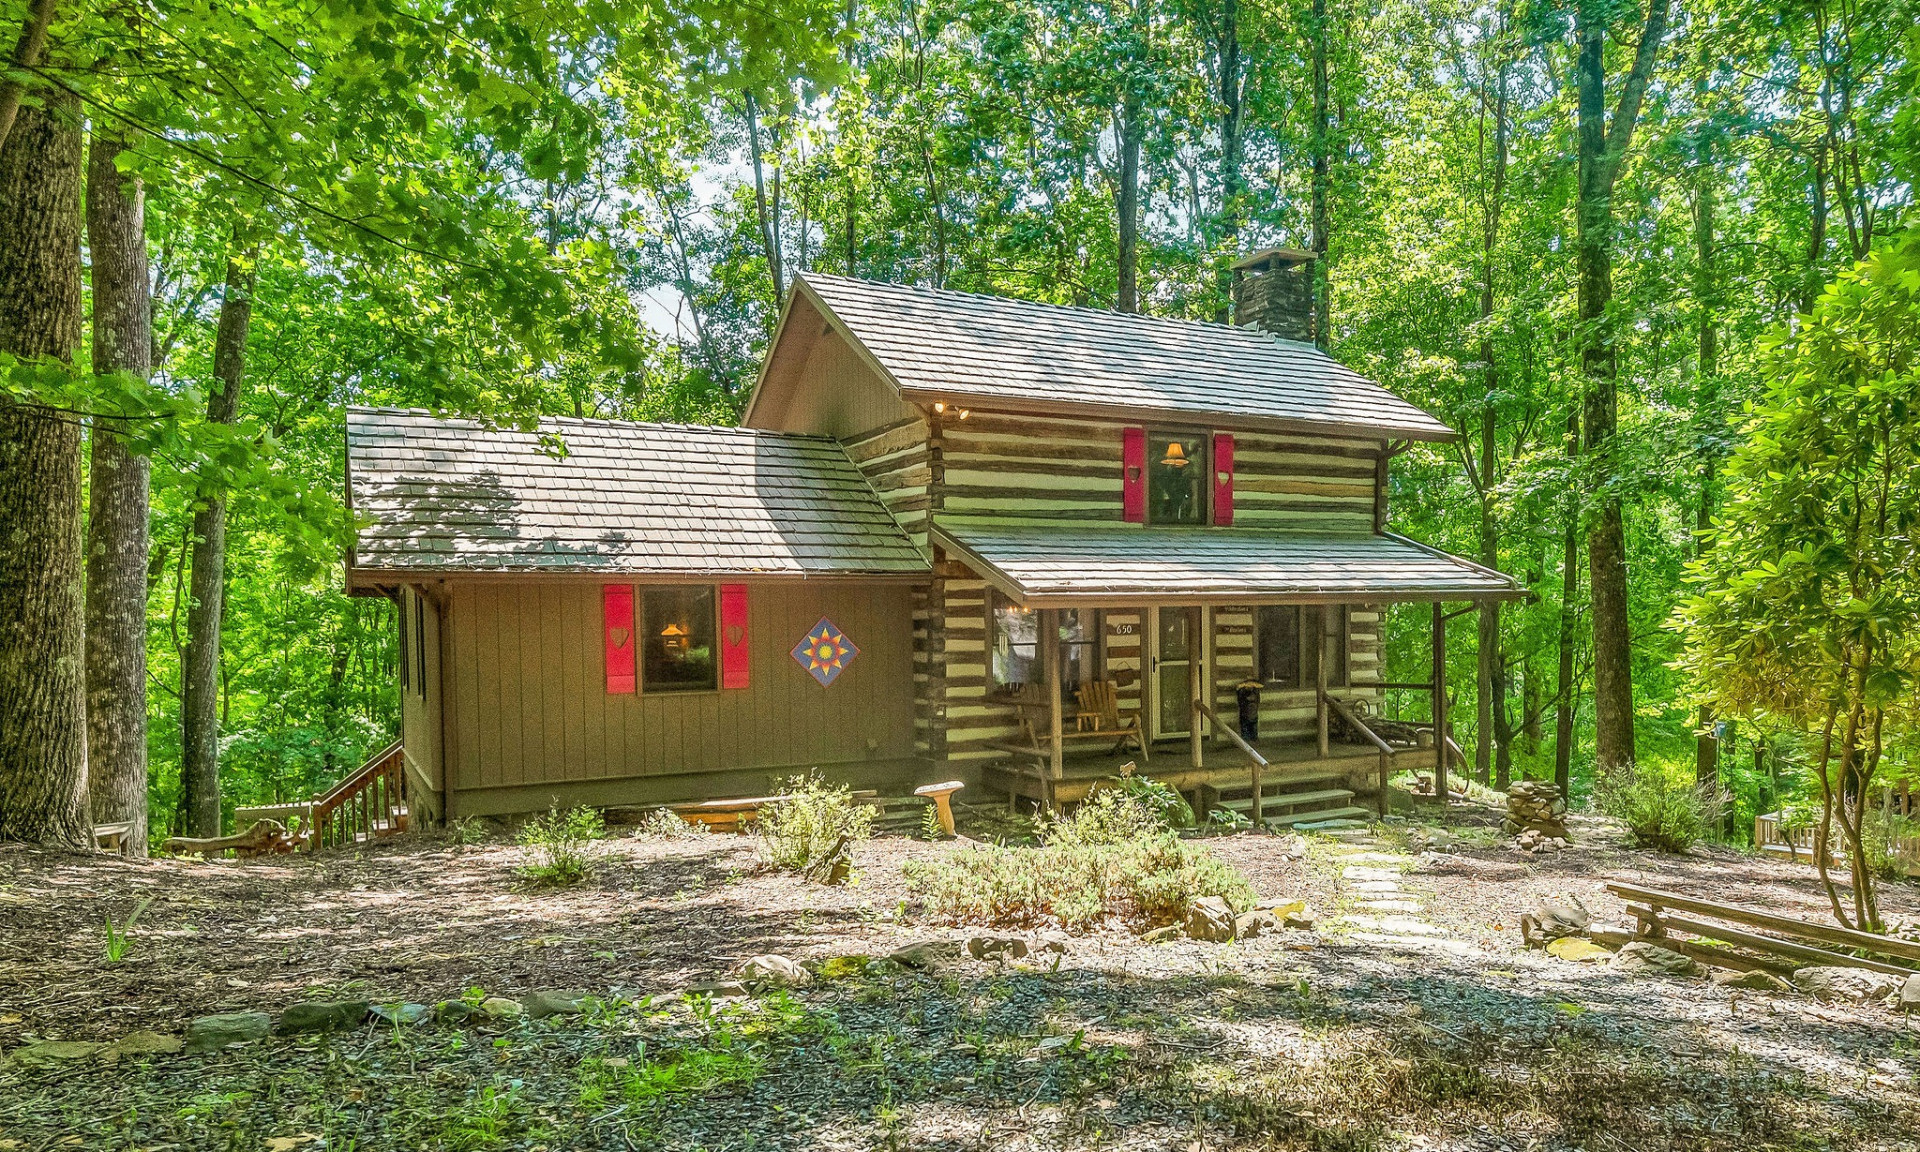 Escape to your own charming antique log cabin.